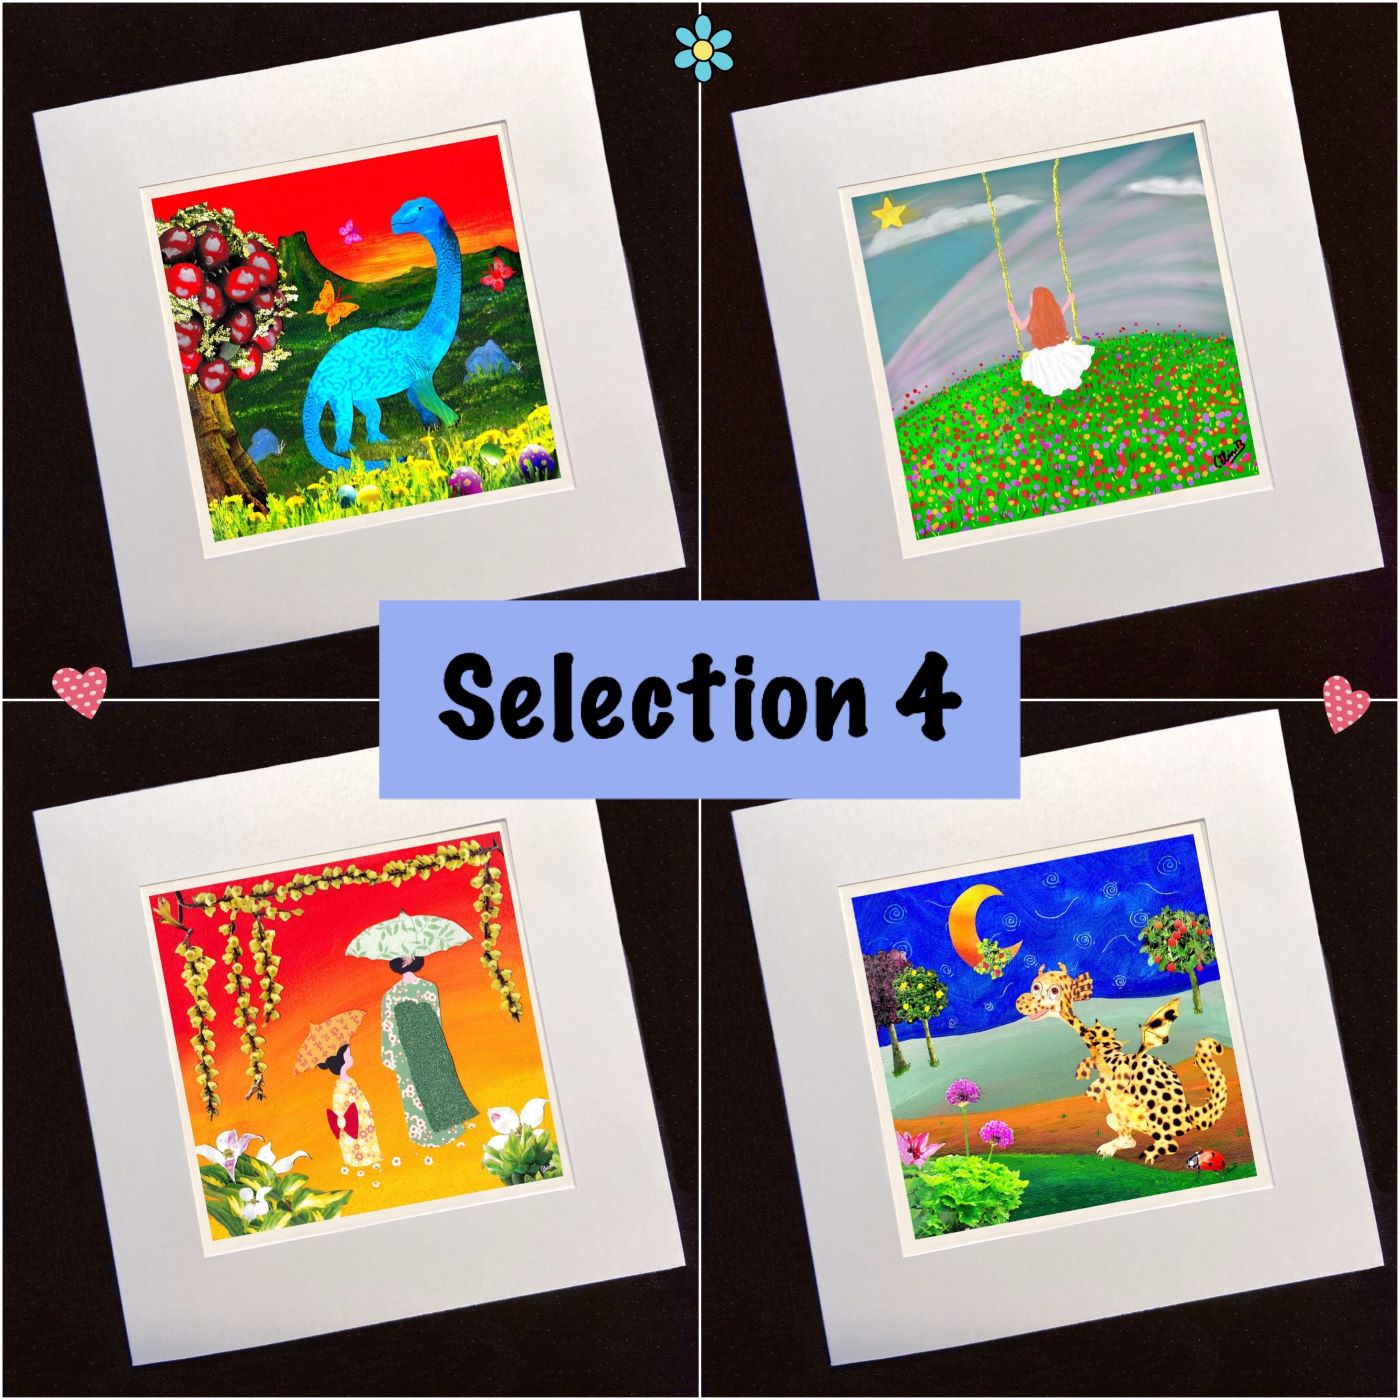 Card selection packs CHILDREN & FUN: 4 cards for £10 - Free P&P 8 cards +